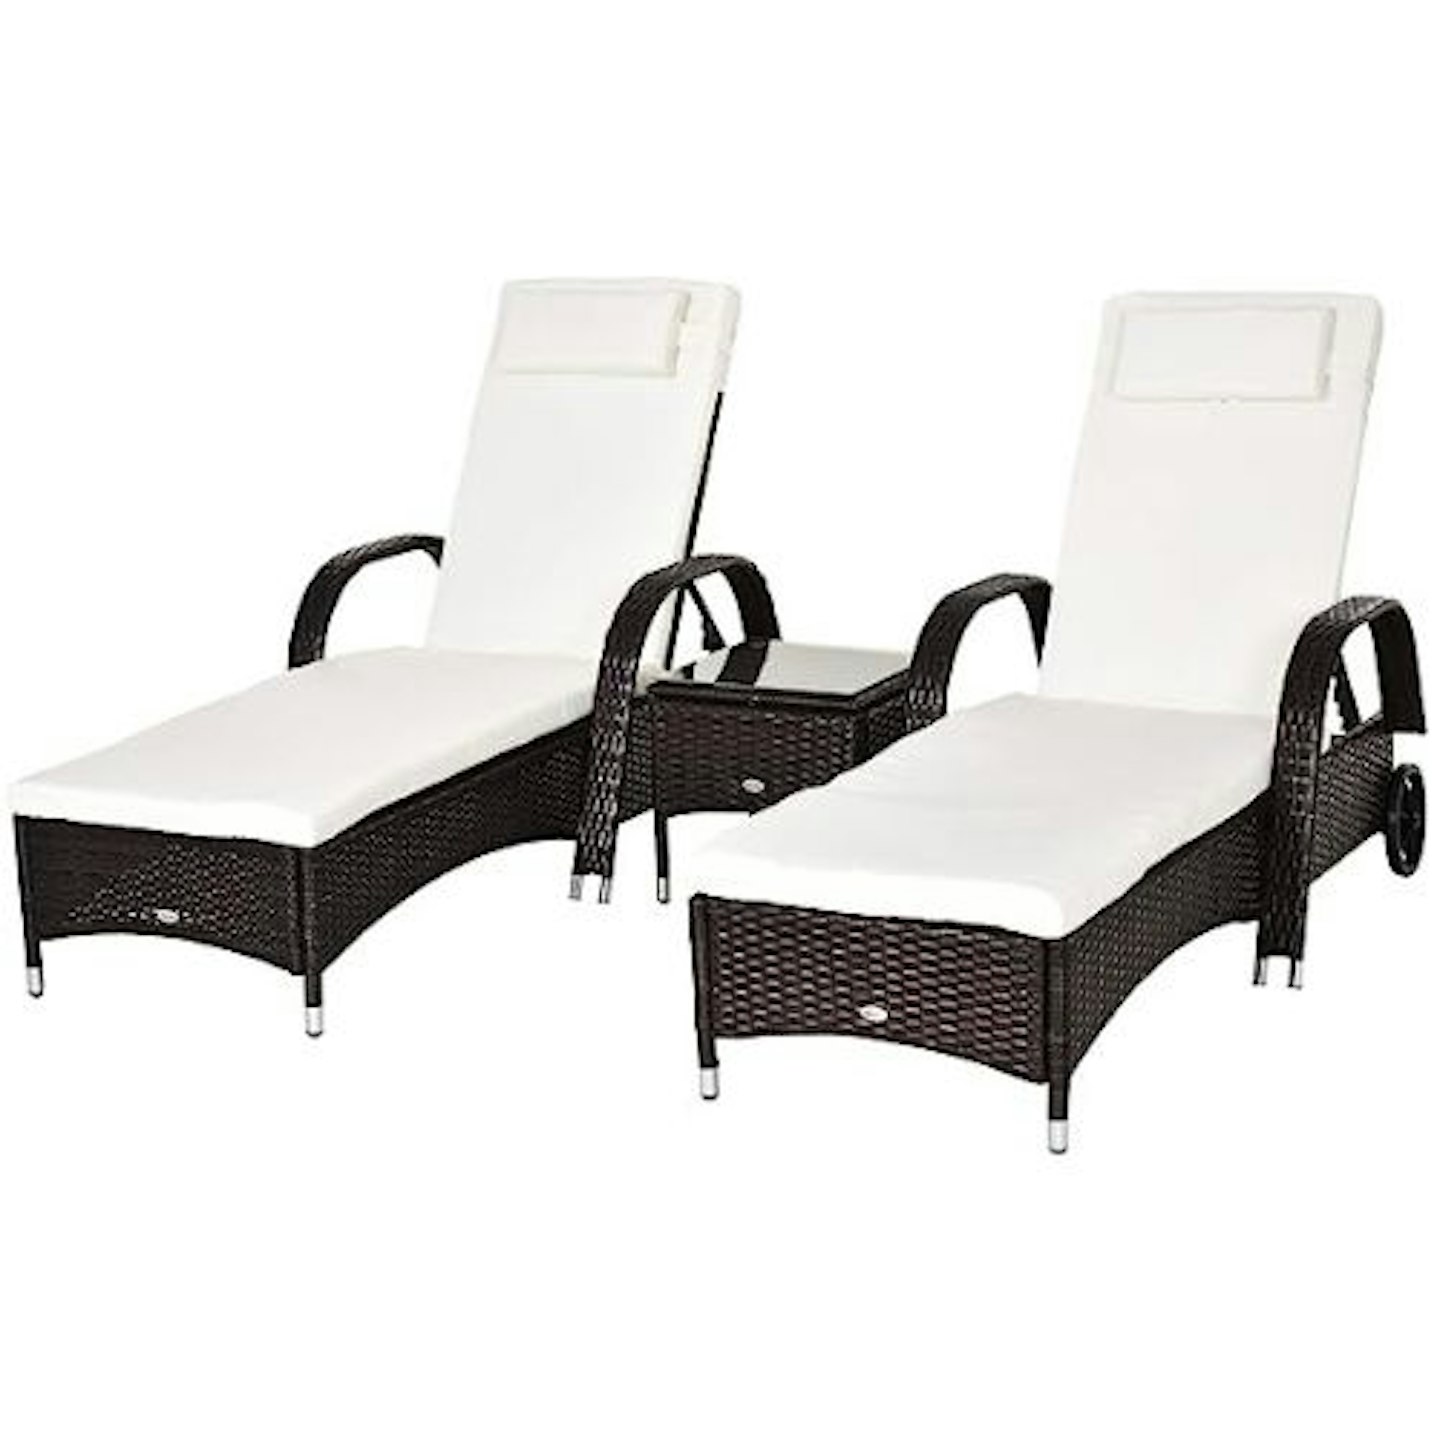 Outsunny 3 Pieces Patio Lounge Chair Set